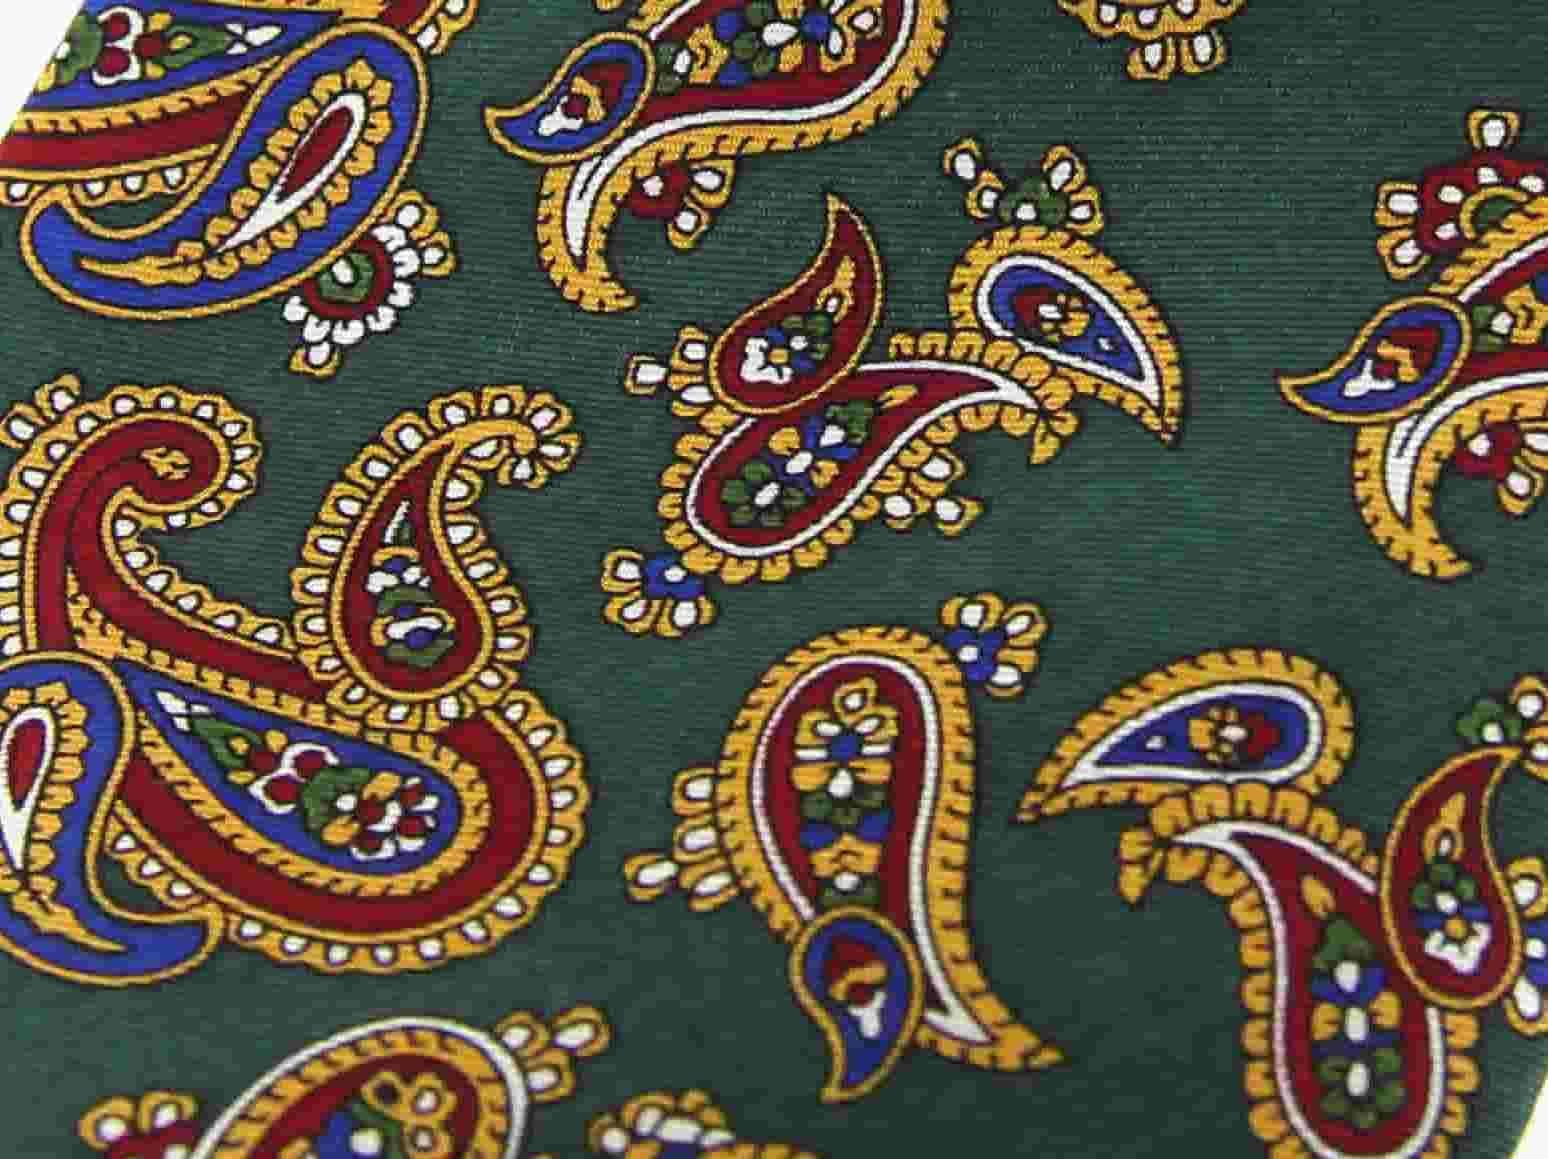 Soprano Paisley Printed Silk Twill Country Handkerchief - Forest Green